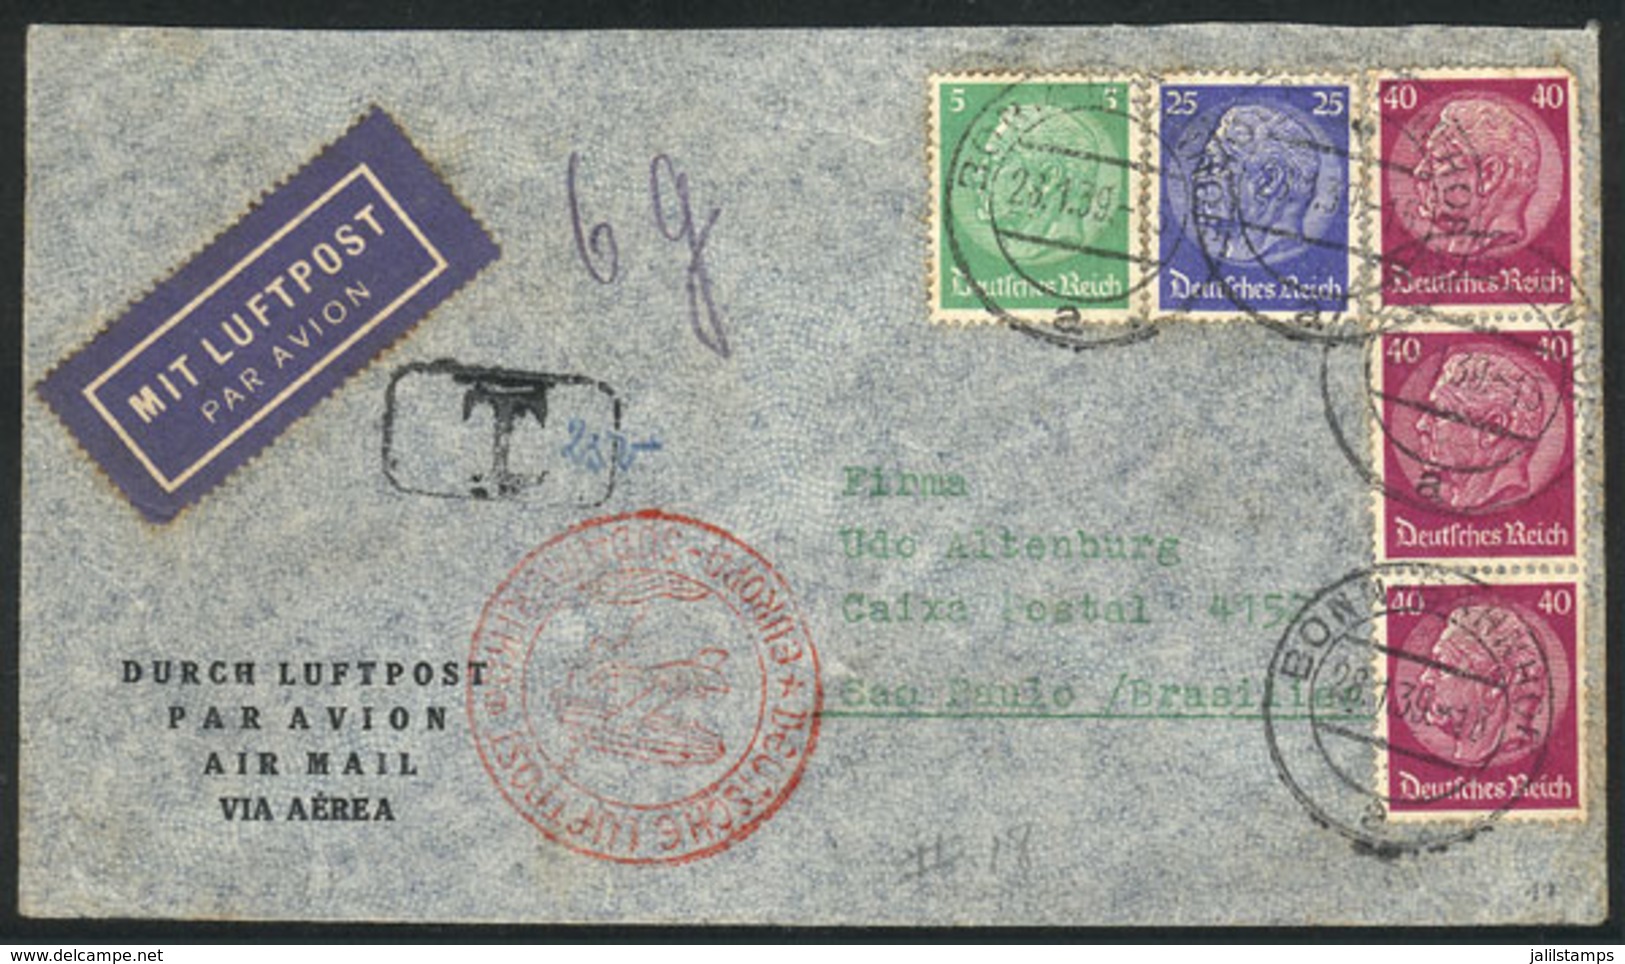 GERMANY: Airmail Cover Sent From Bonn To Brazil On 28/JA/1939 Franked With 1.50Mk., With Due Mark Due To Insufficient Po - Préphilatélie